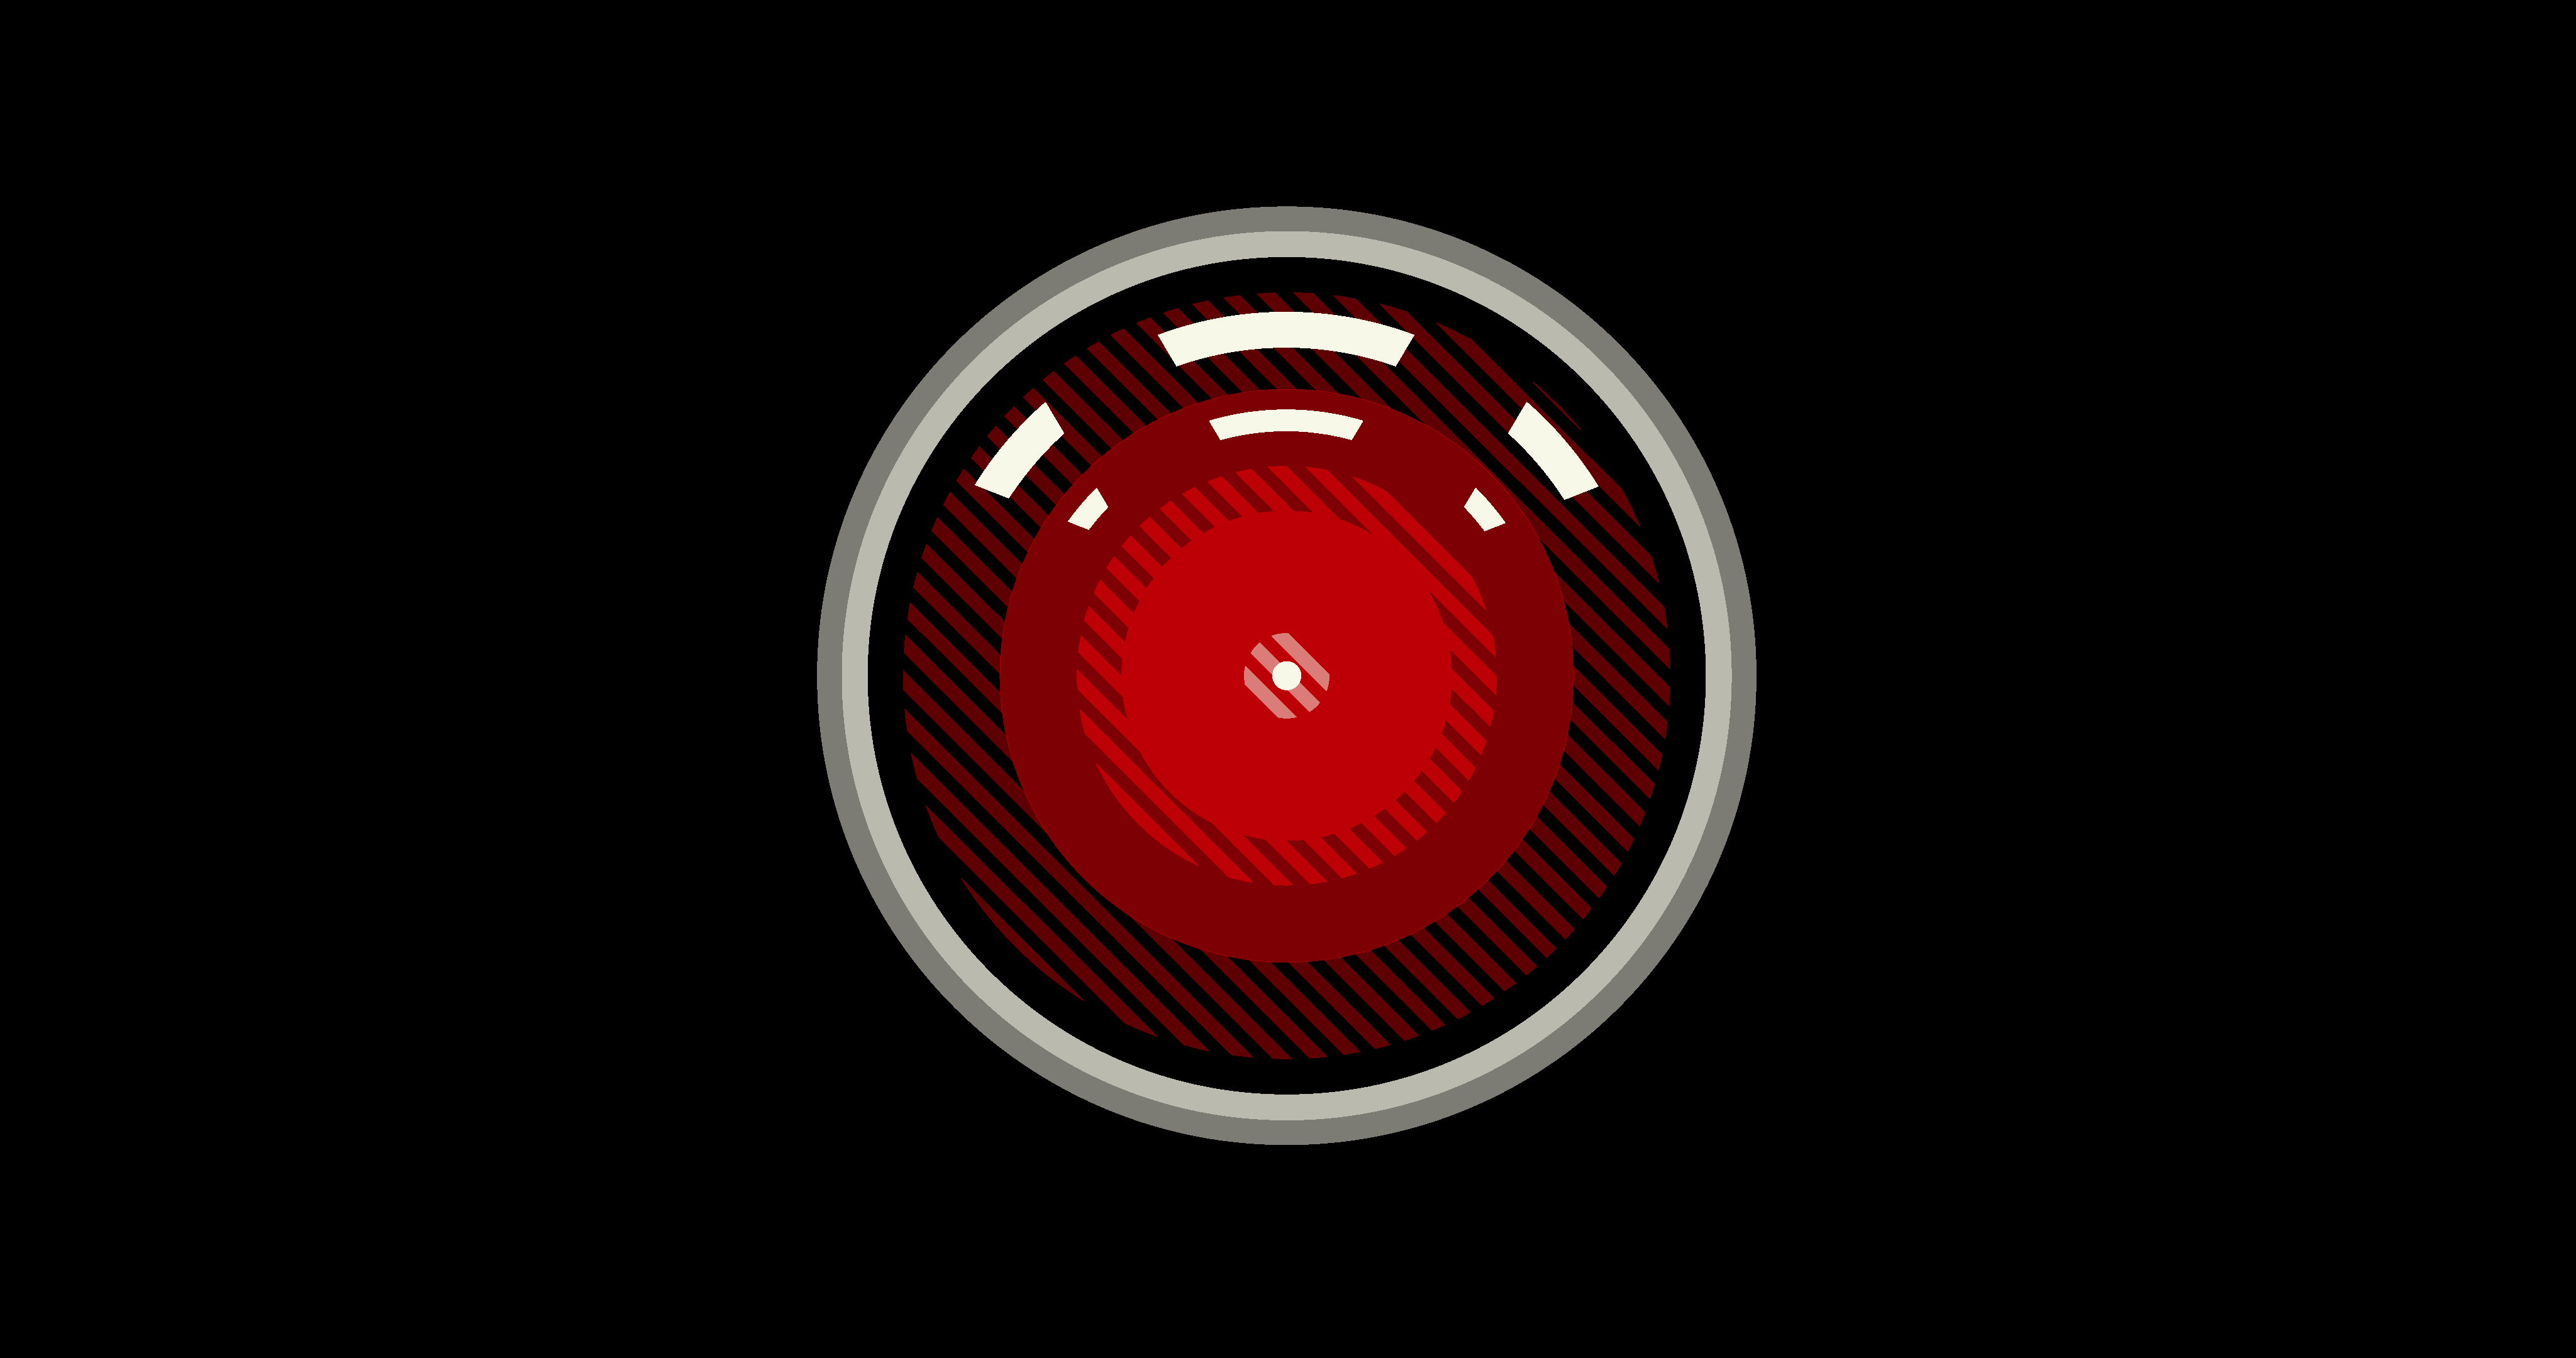 General 4096x2160 2001: A Space Odyssey computer HAL 9000 science fiction Ahoy movies minimalism red black background digital art simple background